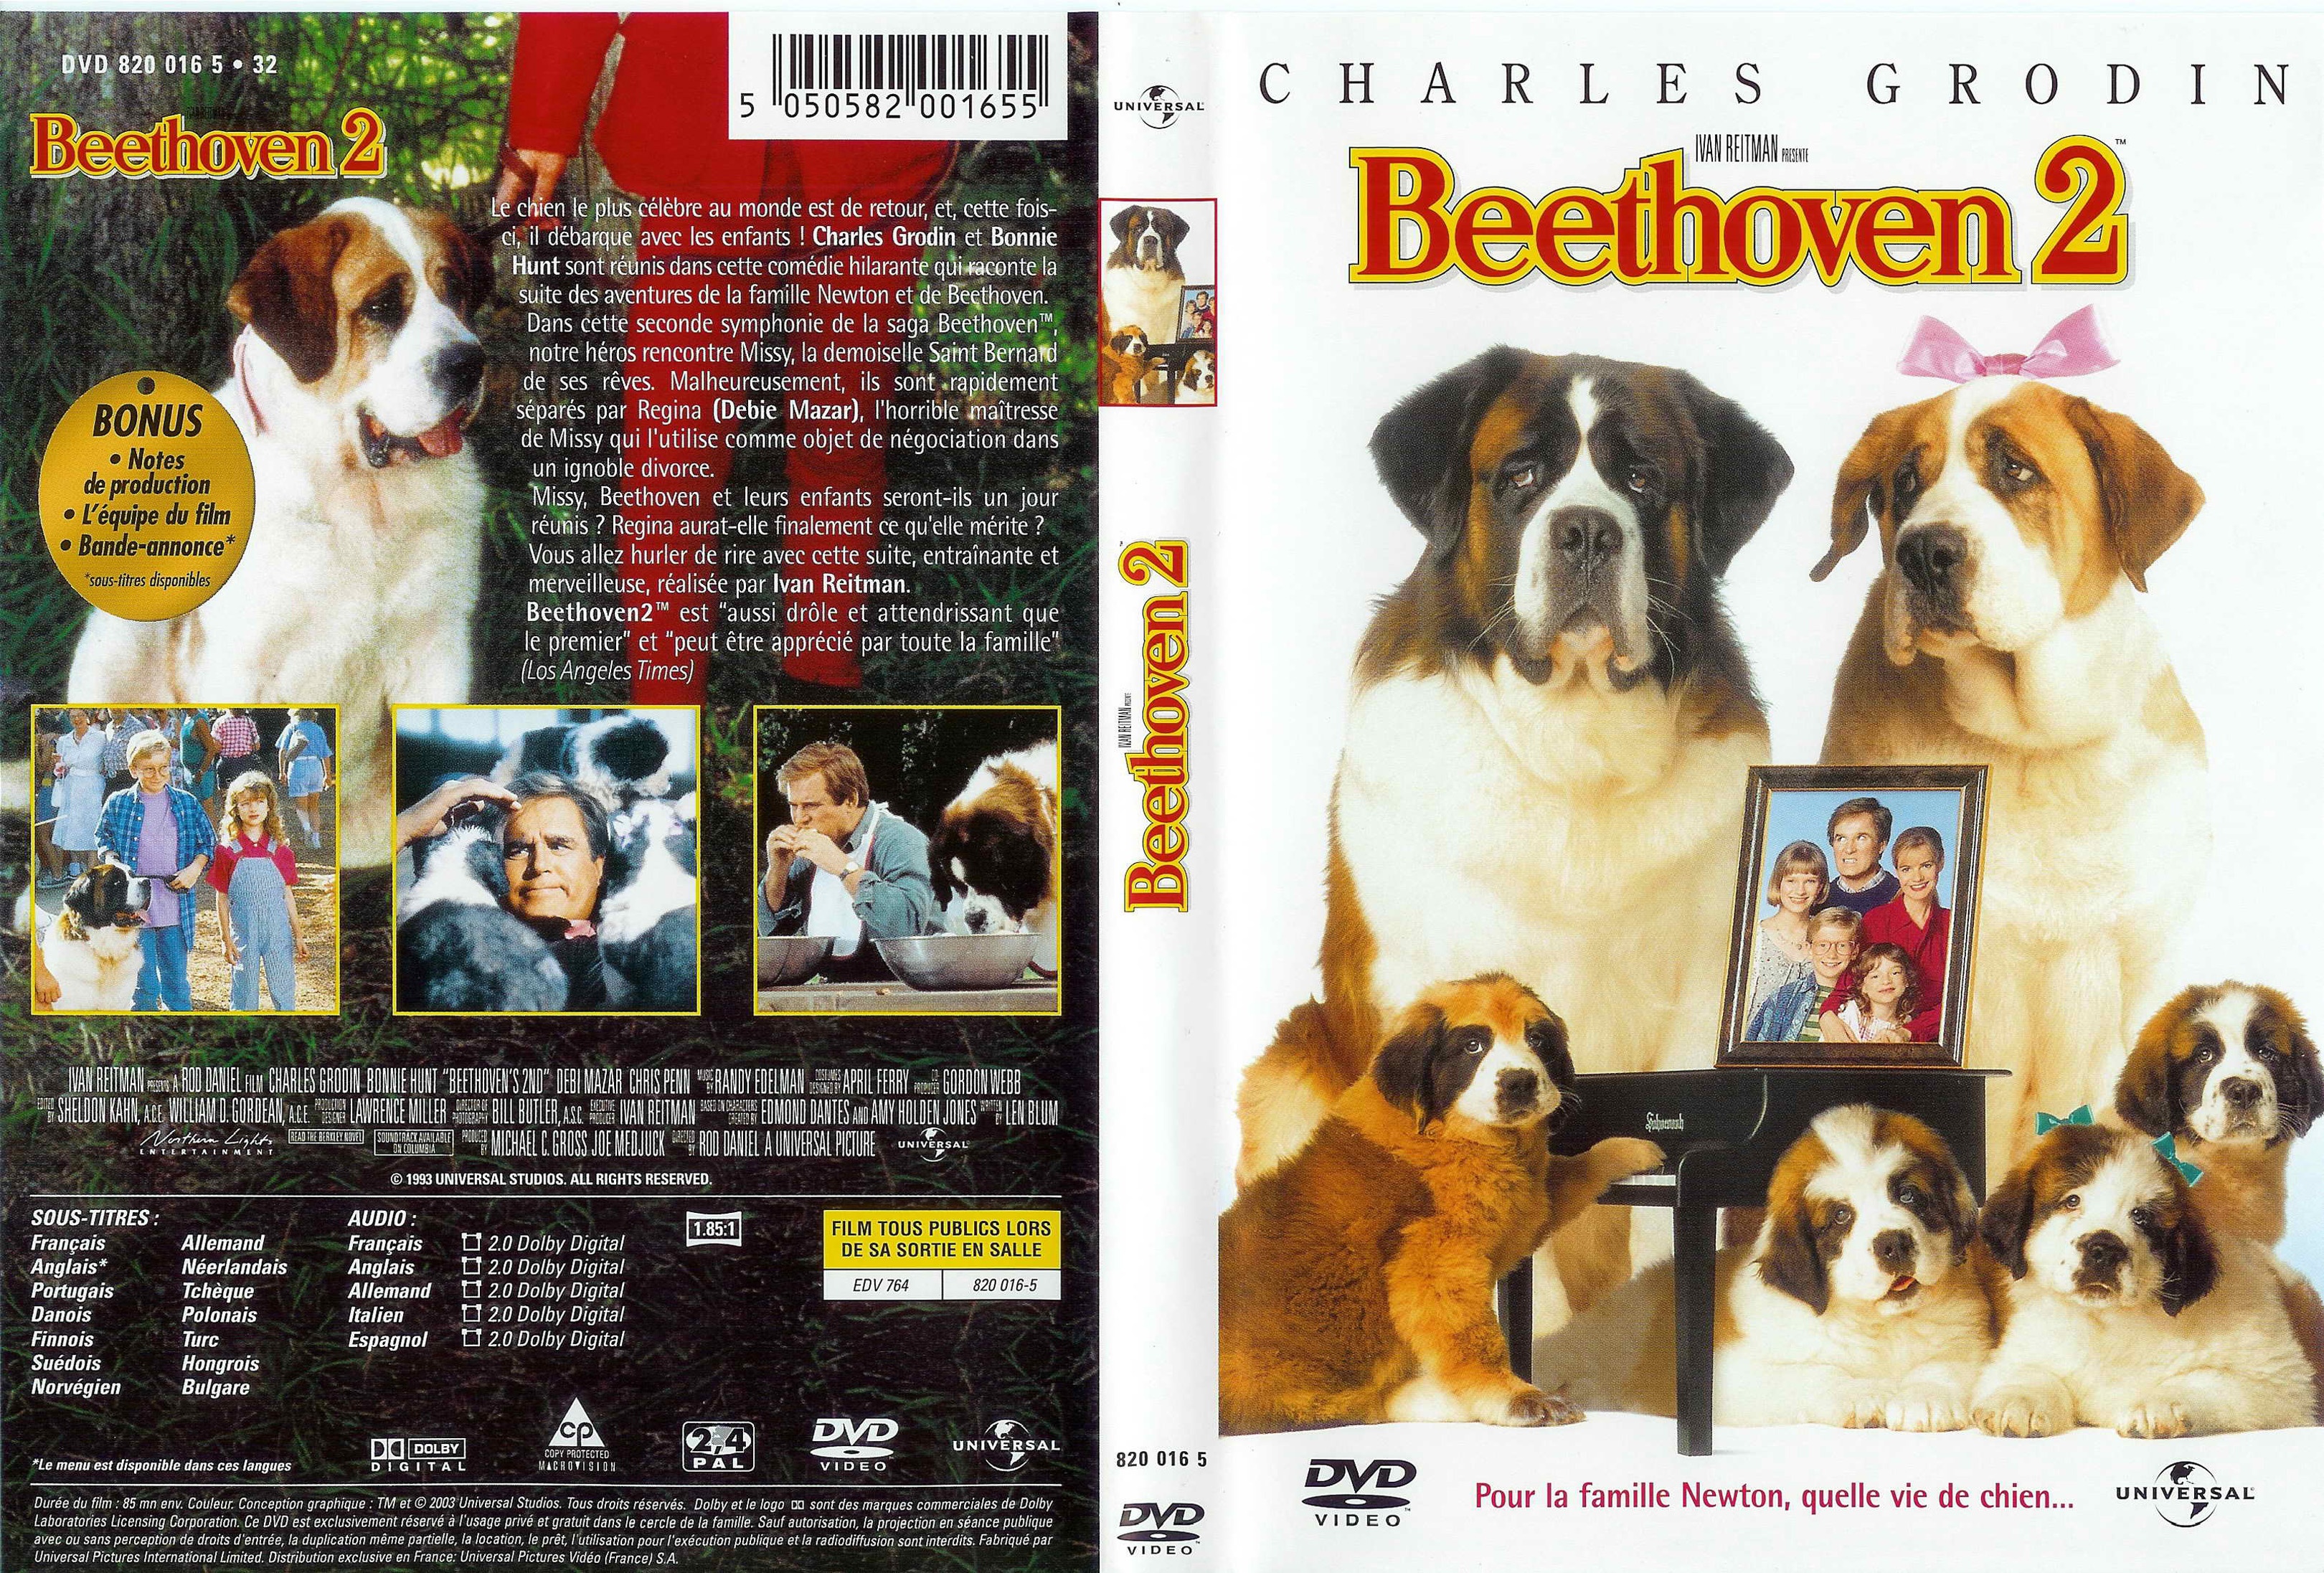 Jaquette DVD Beethoven 2